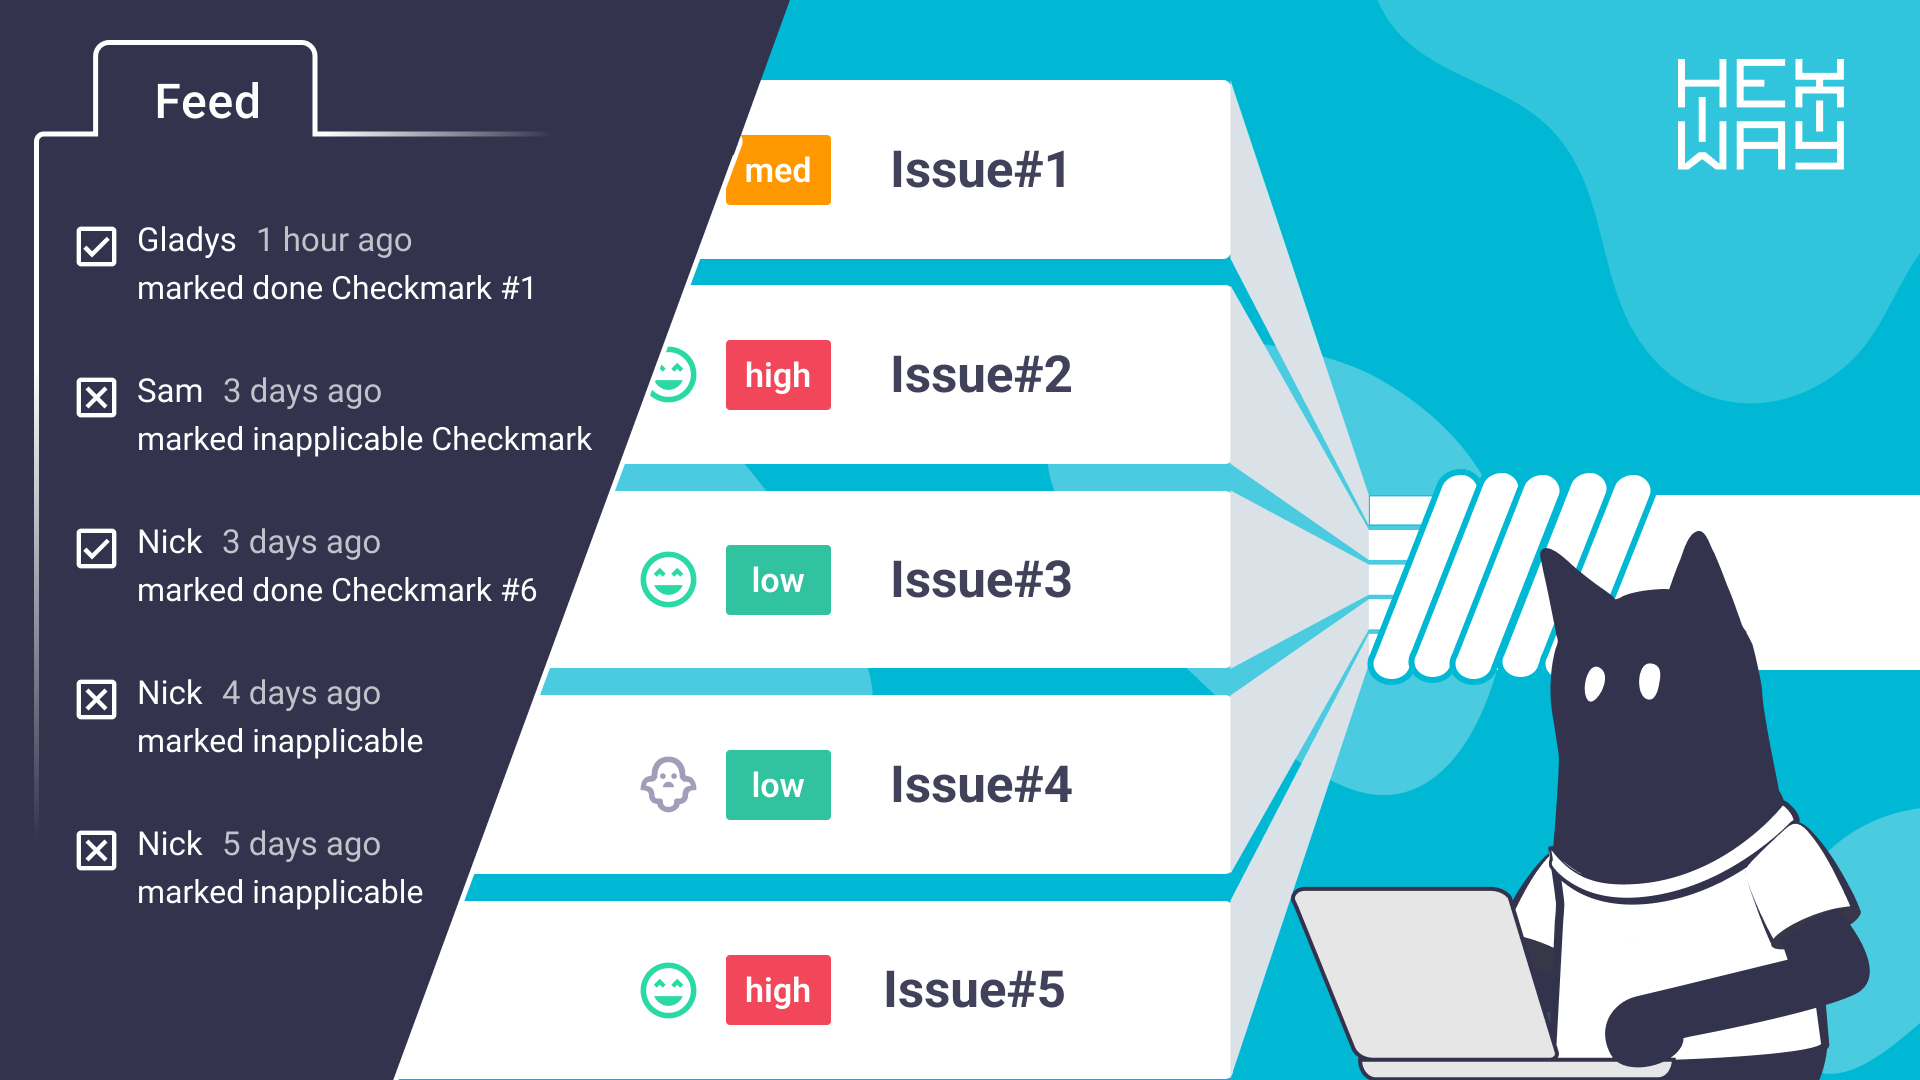 new hexway update — issue merge & new project feed